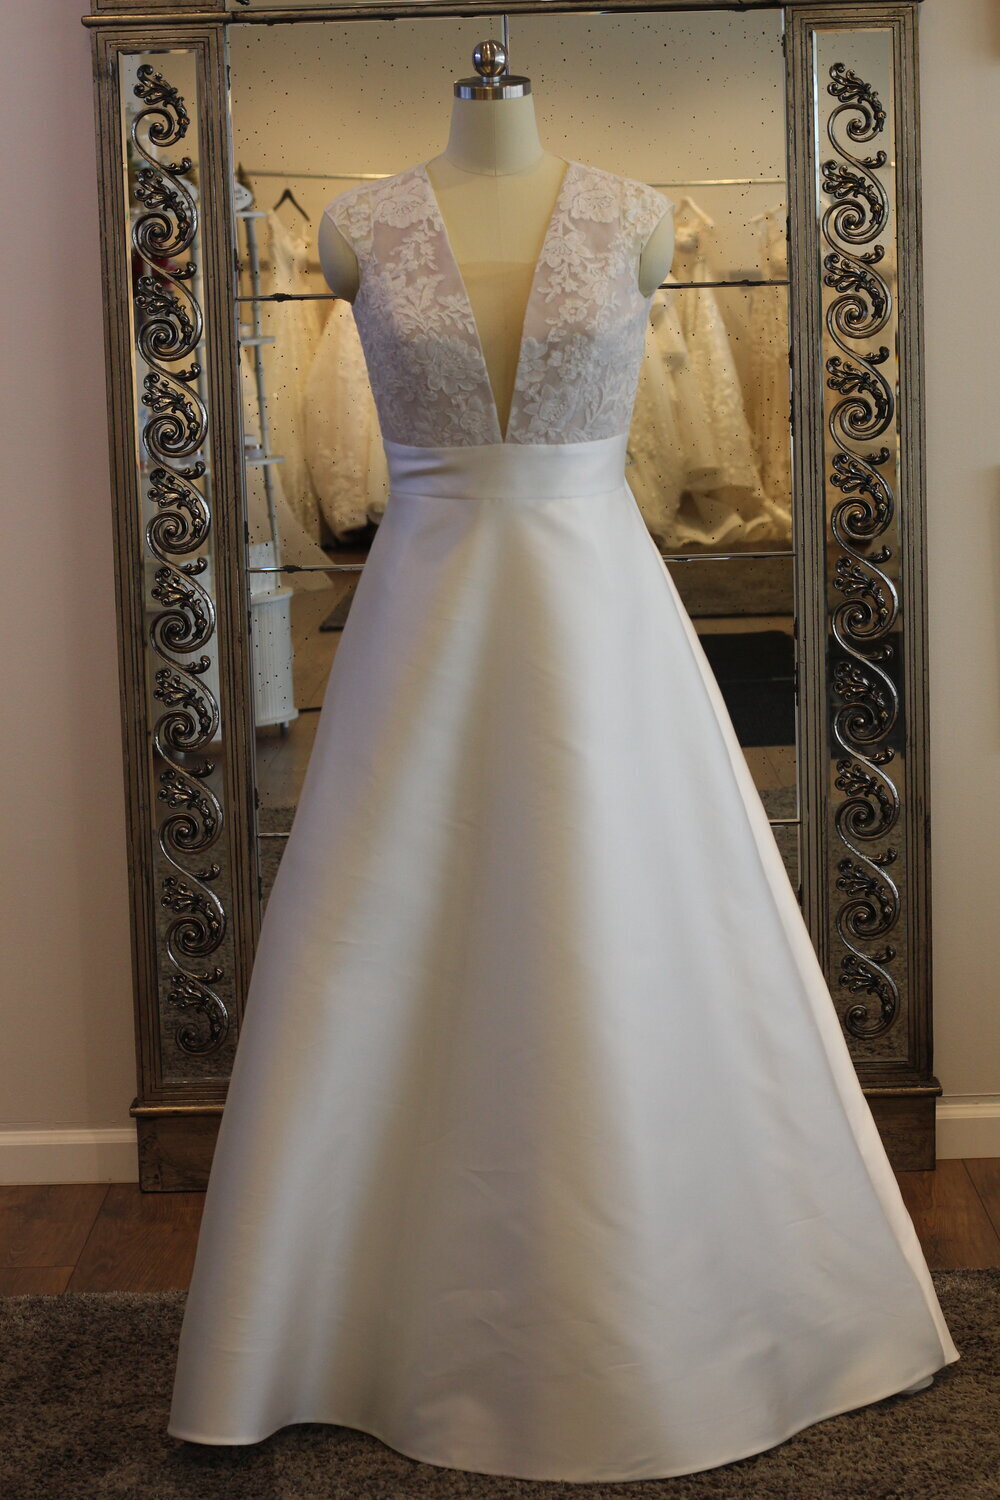 L'amour Bridal - L'amour Bridal - Stunning Wedding Dresses and Bridal Gowns  Online